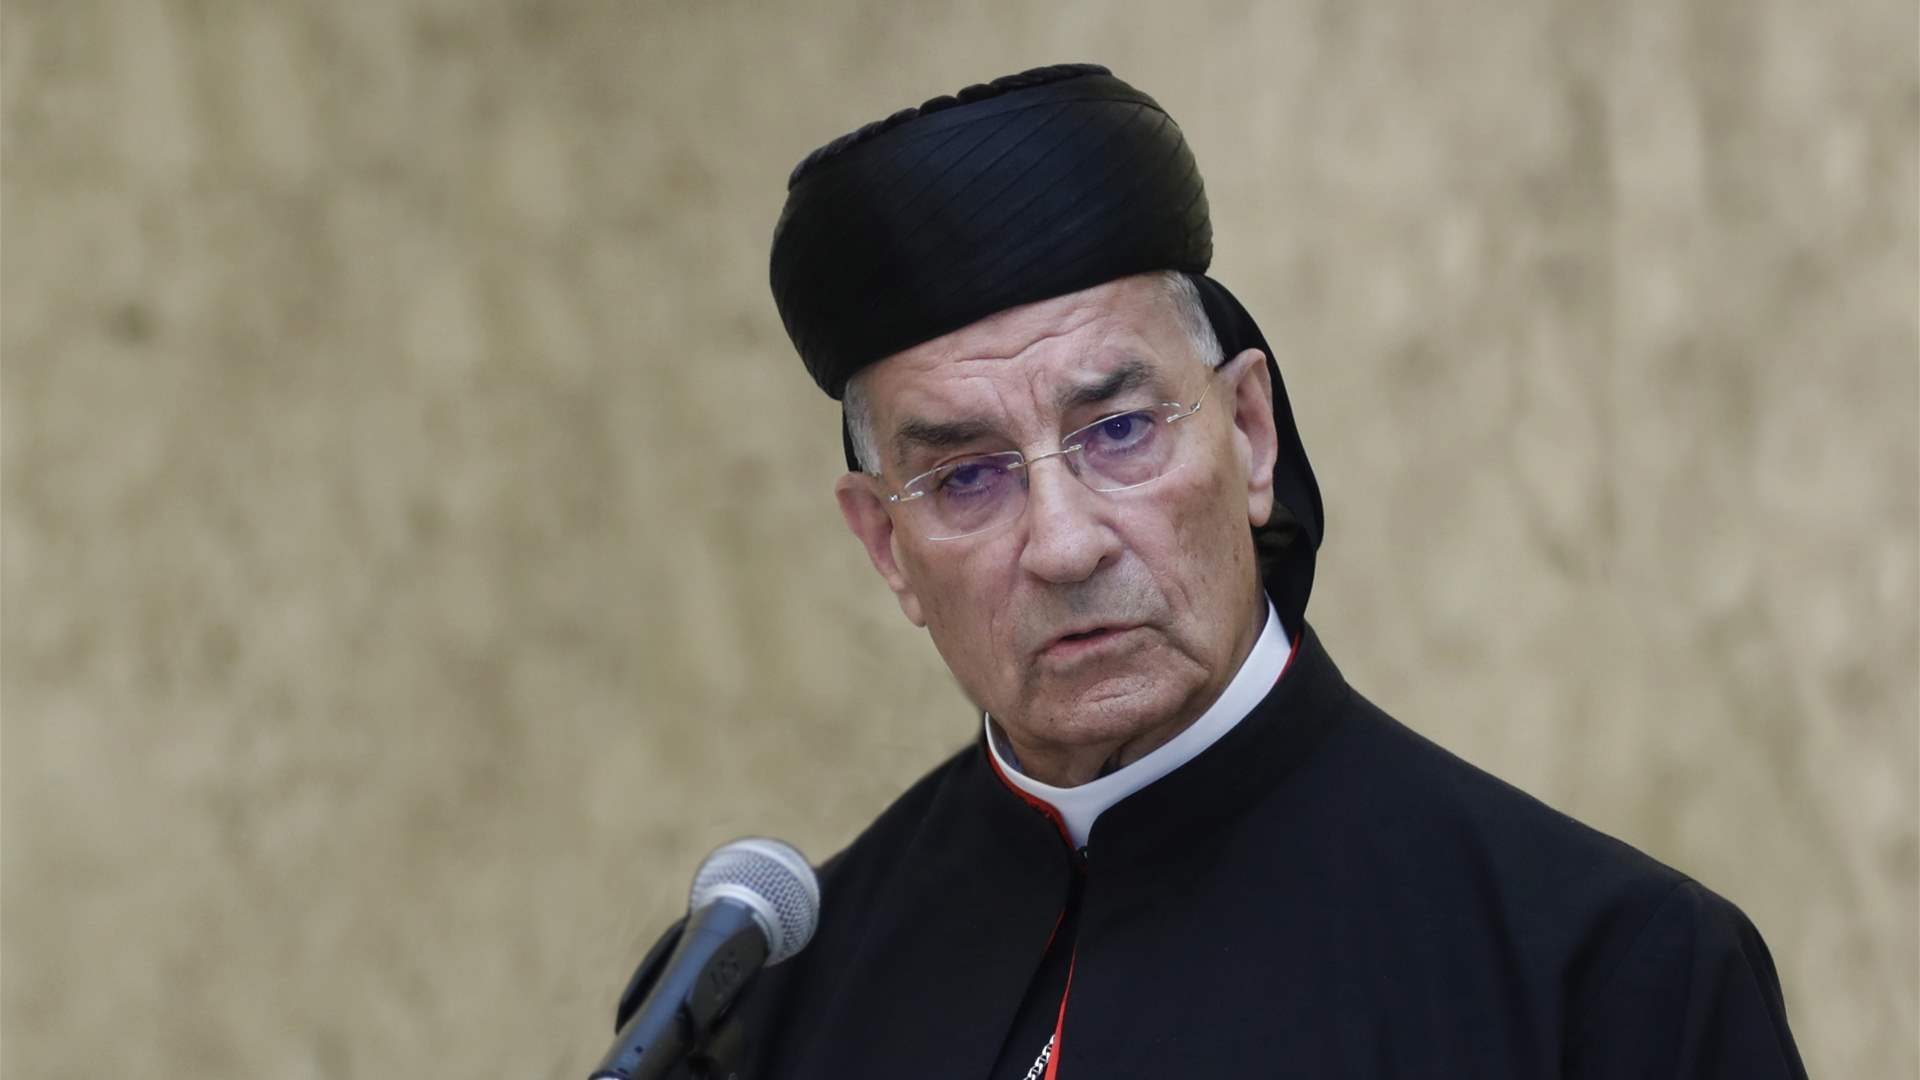 Maronite Patriarch al-Rahi: Poor governance by political leaders forcing Lebanese citizens to flee